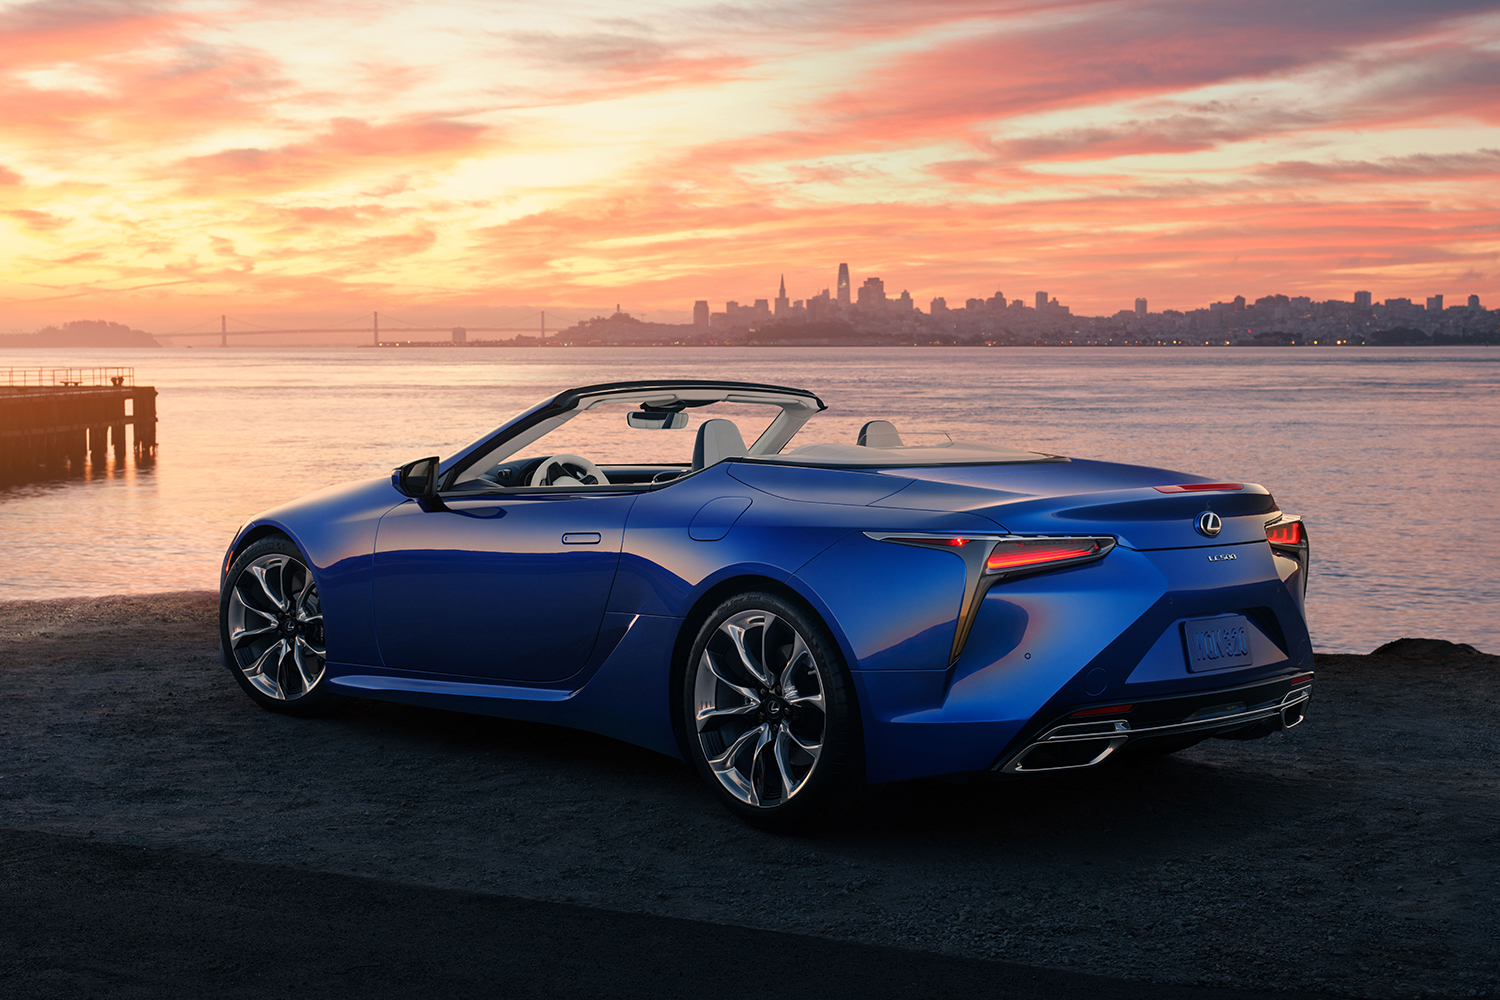 The rear end of a blue The Rear End of the 2021 Lexus LC 500 Convertible with a city and sunset in the background. We test drove the grand tourer and wholeheartedly recommend it.